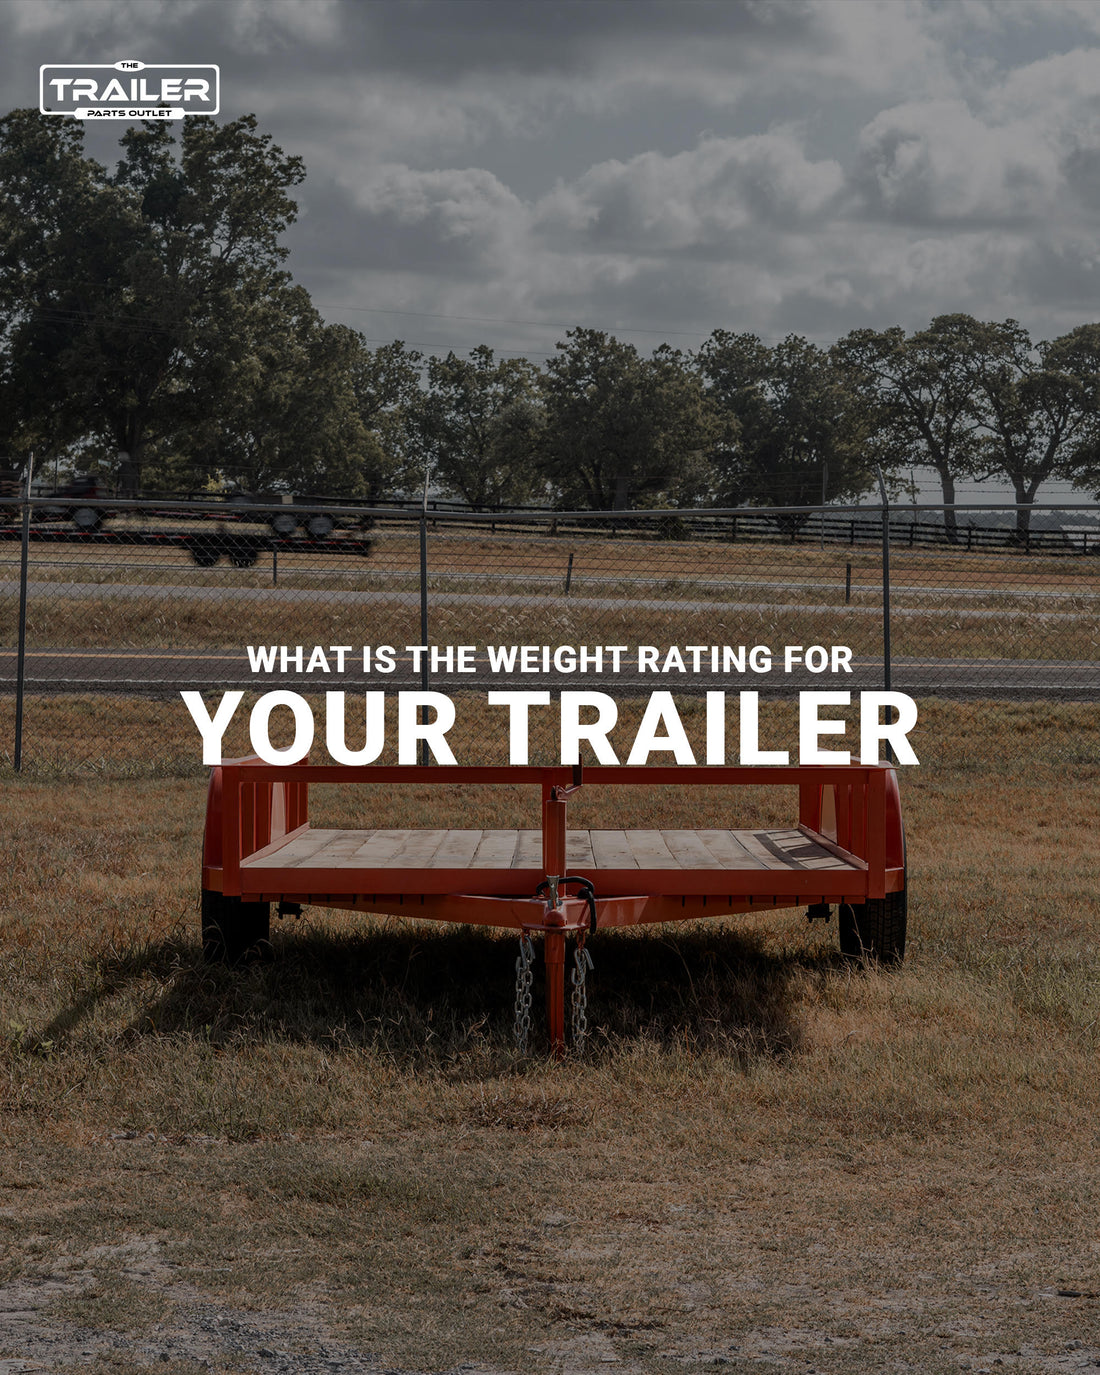 Let’s Figure Out the Weight Rating of Your Trailer